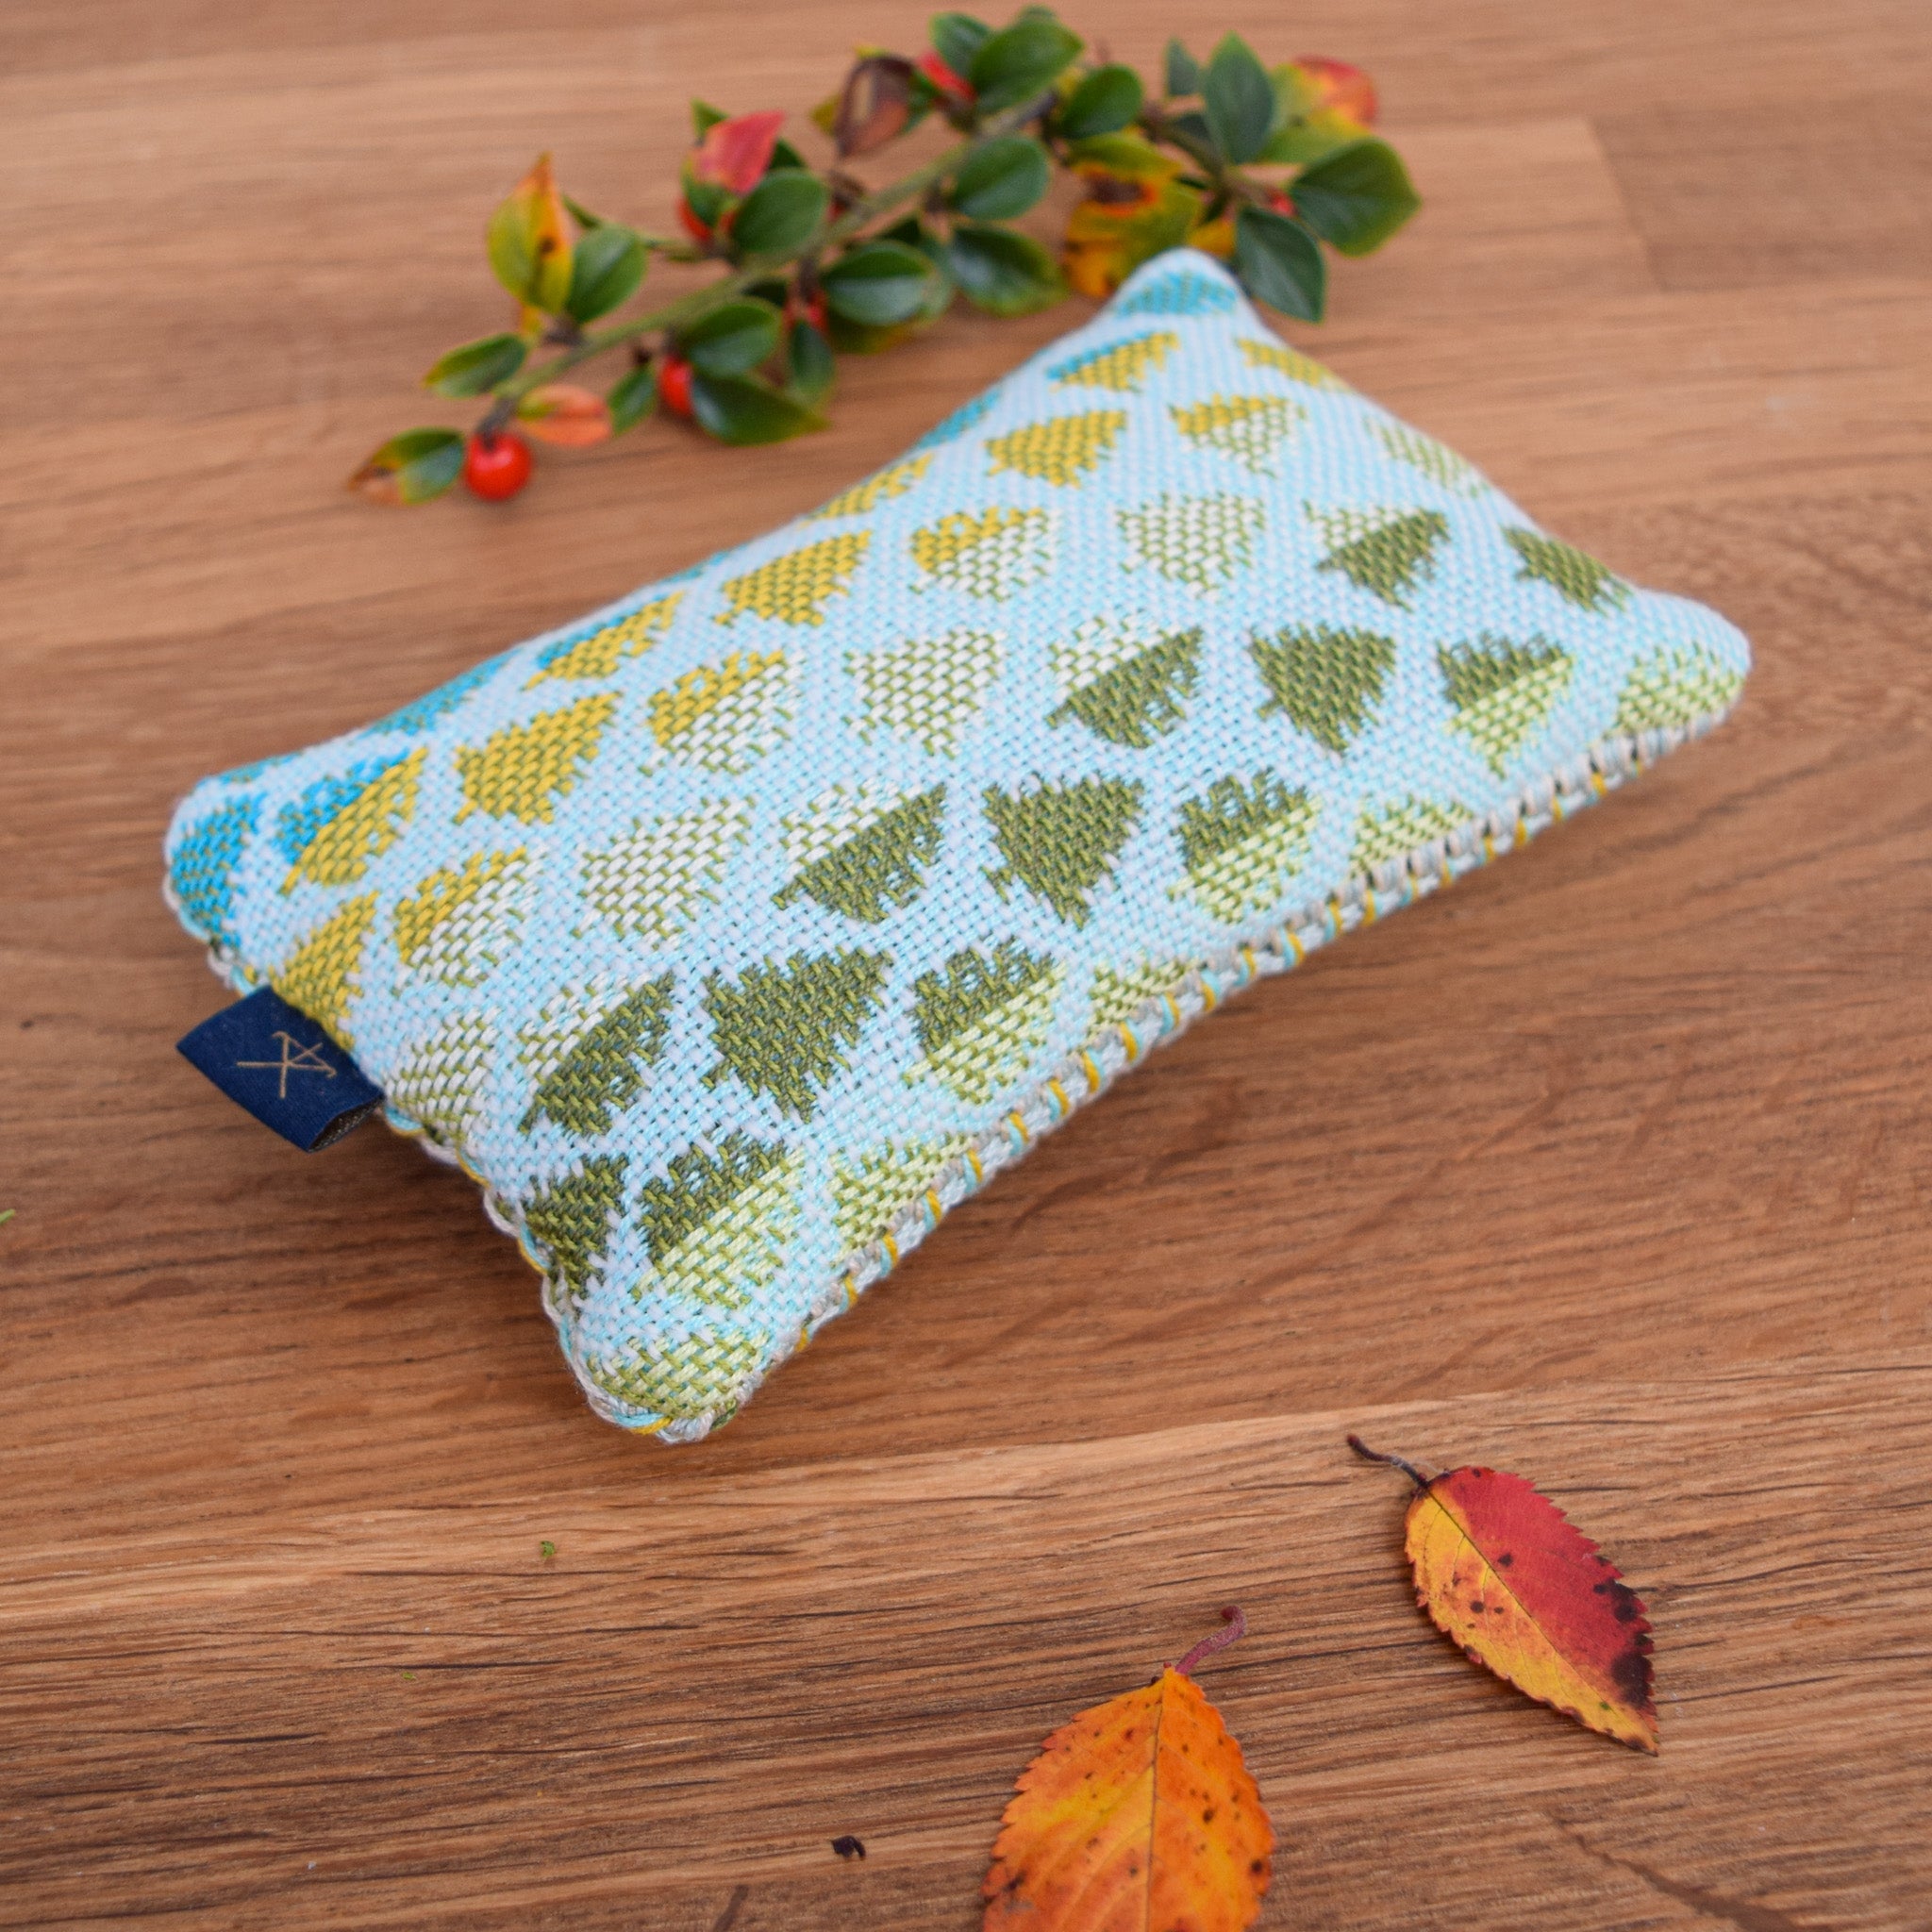 A small cedar pouch sitting on a wooden tabletop with fir tree handwoven design. Around the pouch are some autumnal leaves.